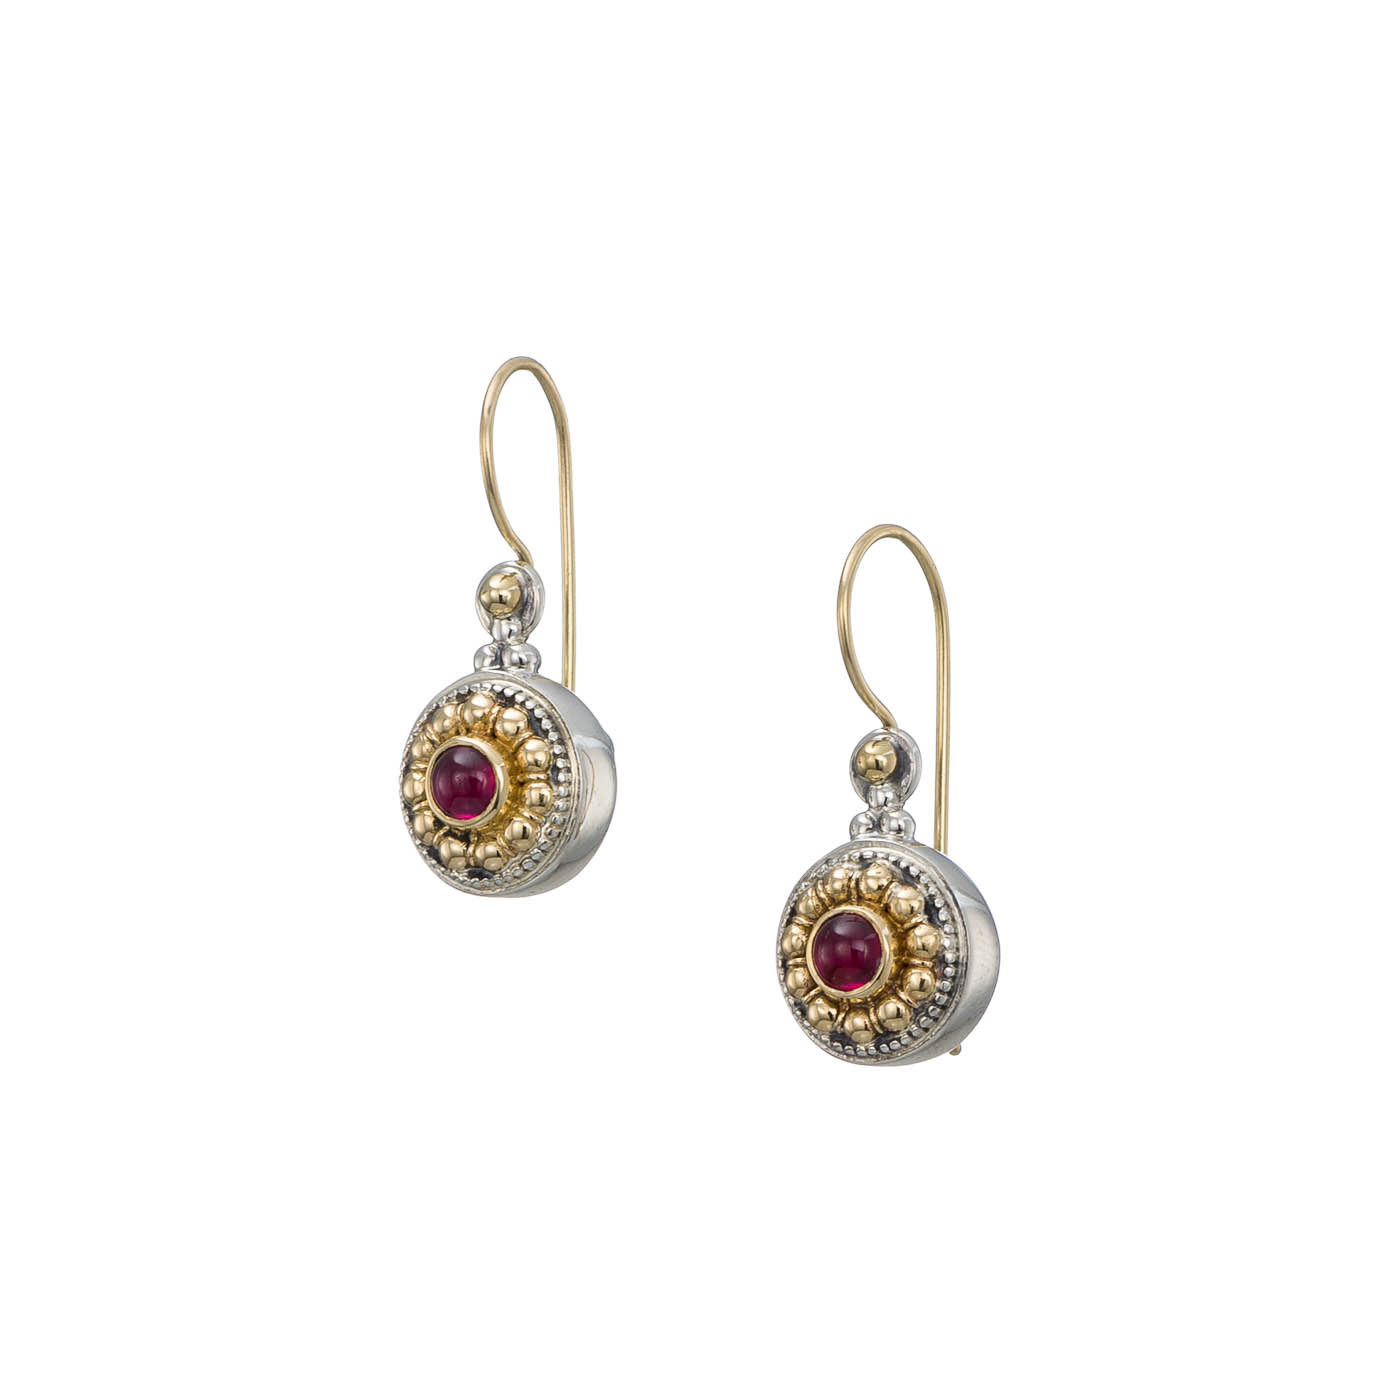 Athenian flowers small round earrings in 18K Gold and  Sterling Silver